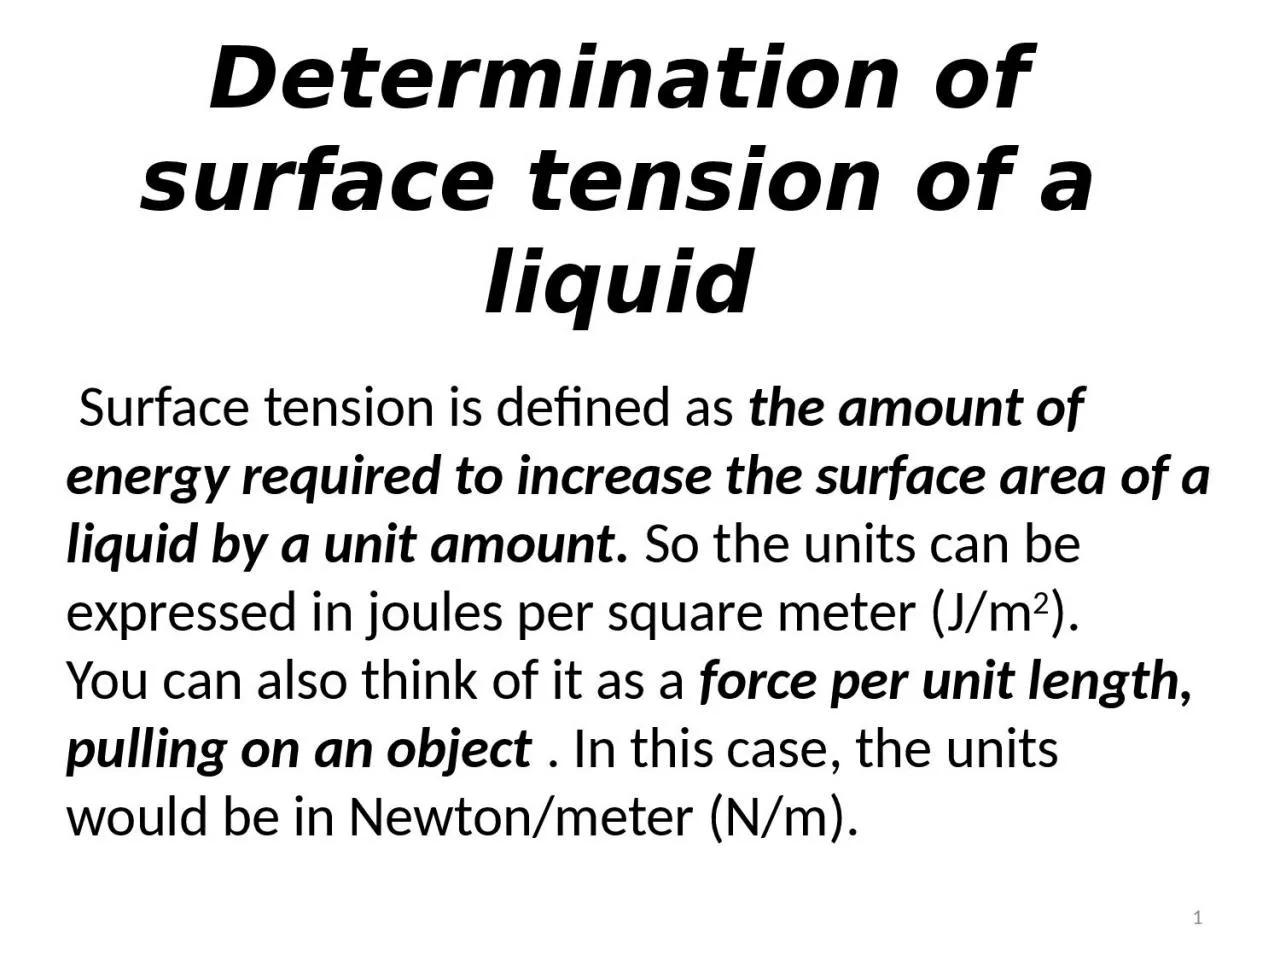 Determination of surface tension of a liquid